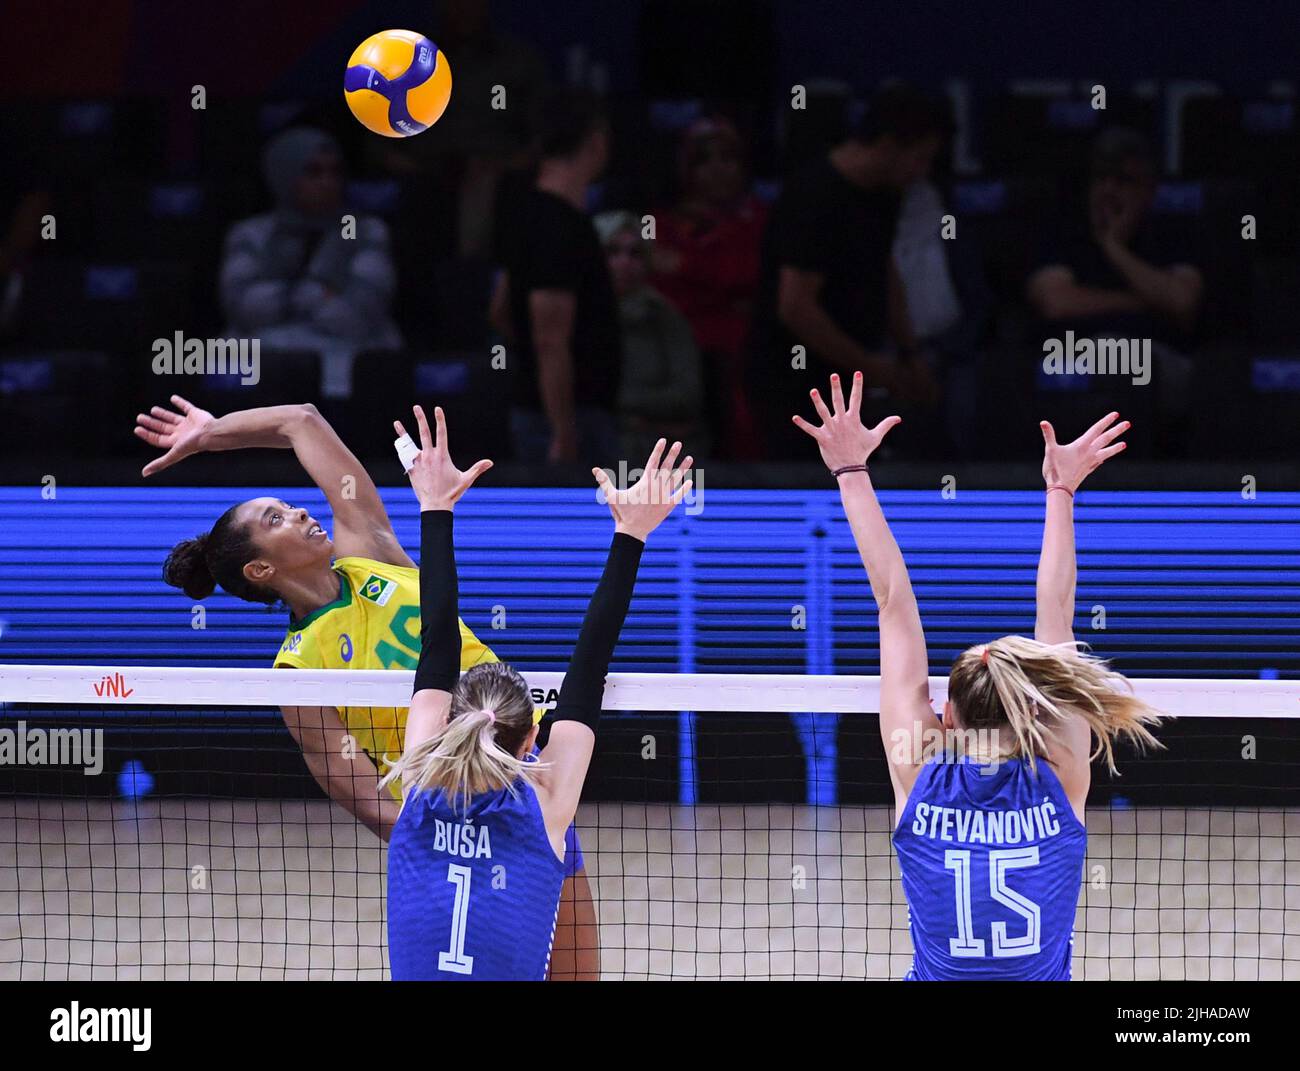 2022 fivb volleyball womens nations league live